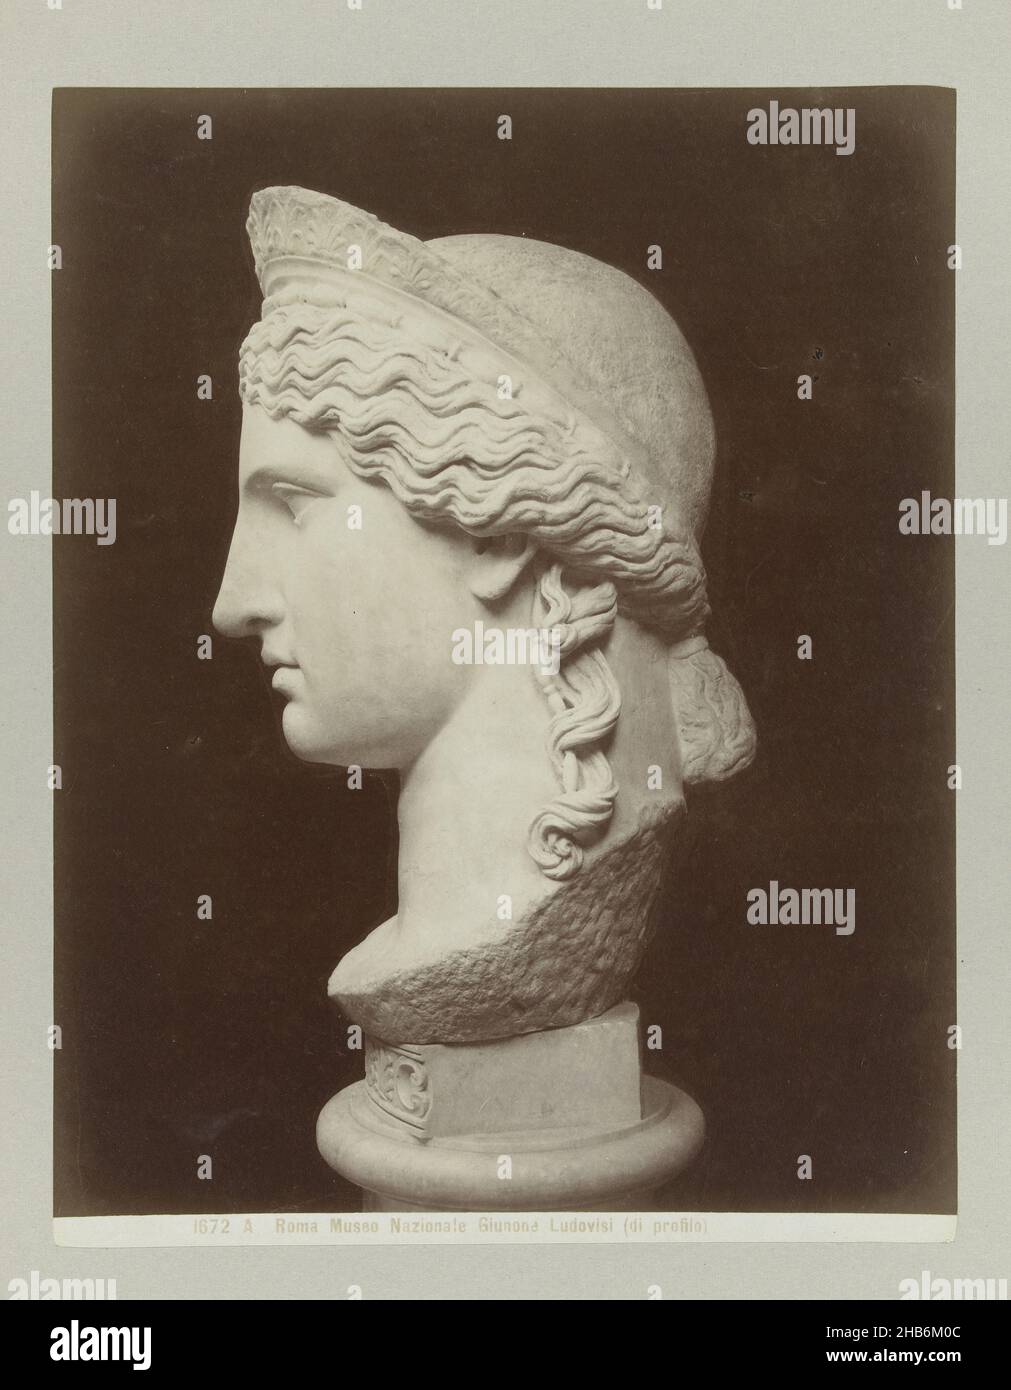 Bust of Giunone Ludovisi in profile1672 A Roma Museo Nazionale Giunone Ludovisi (di profilo) (title on object), anonymous, Rome, c. 1880 - c. 1904, paper, albumen print, height 258 mm × width 201 mmheight 327 mm × width 241 mm Stock Photo